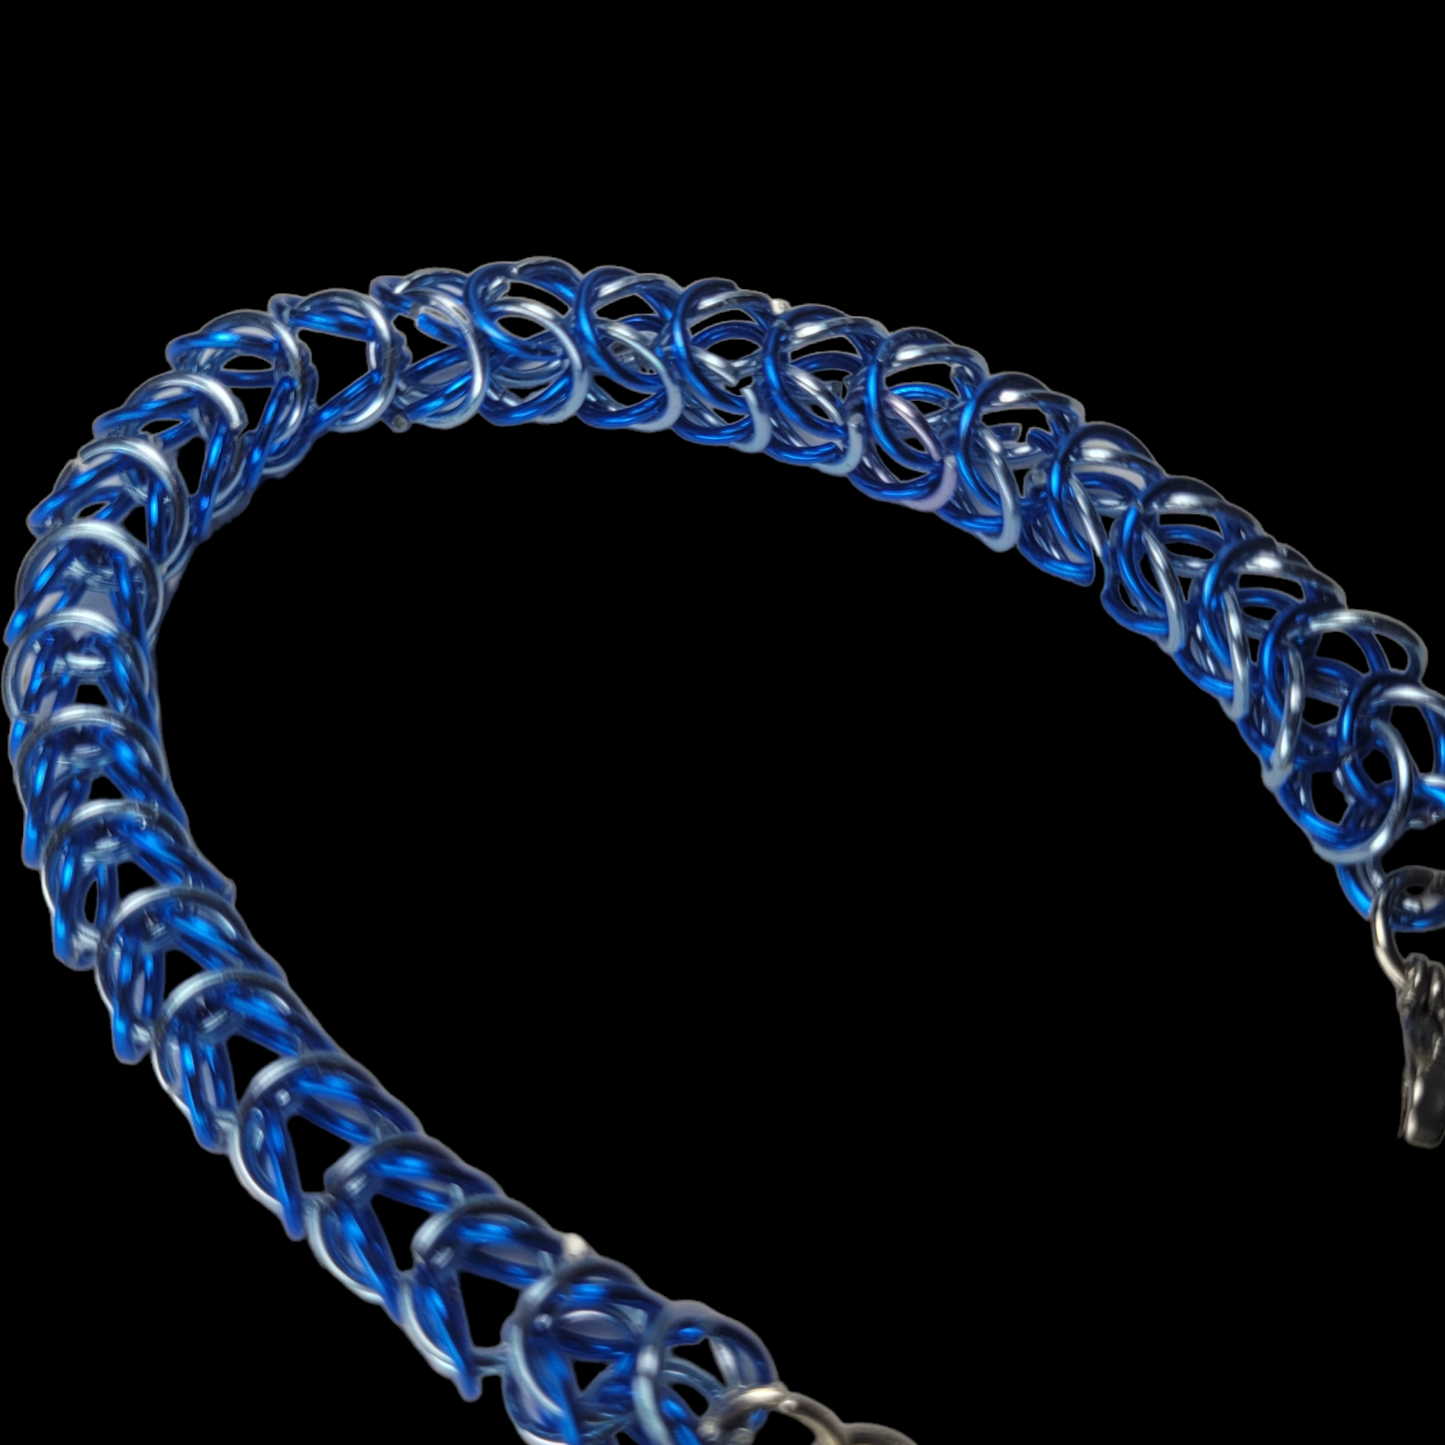 Bracelet, blue and ice blue chainmail